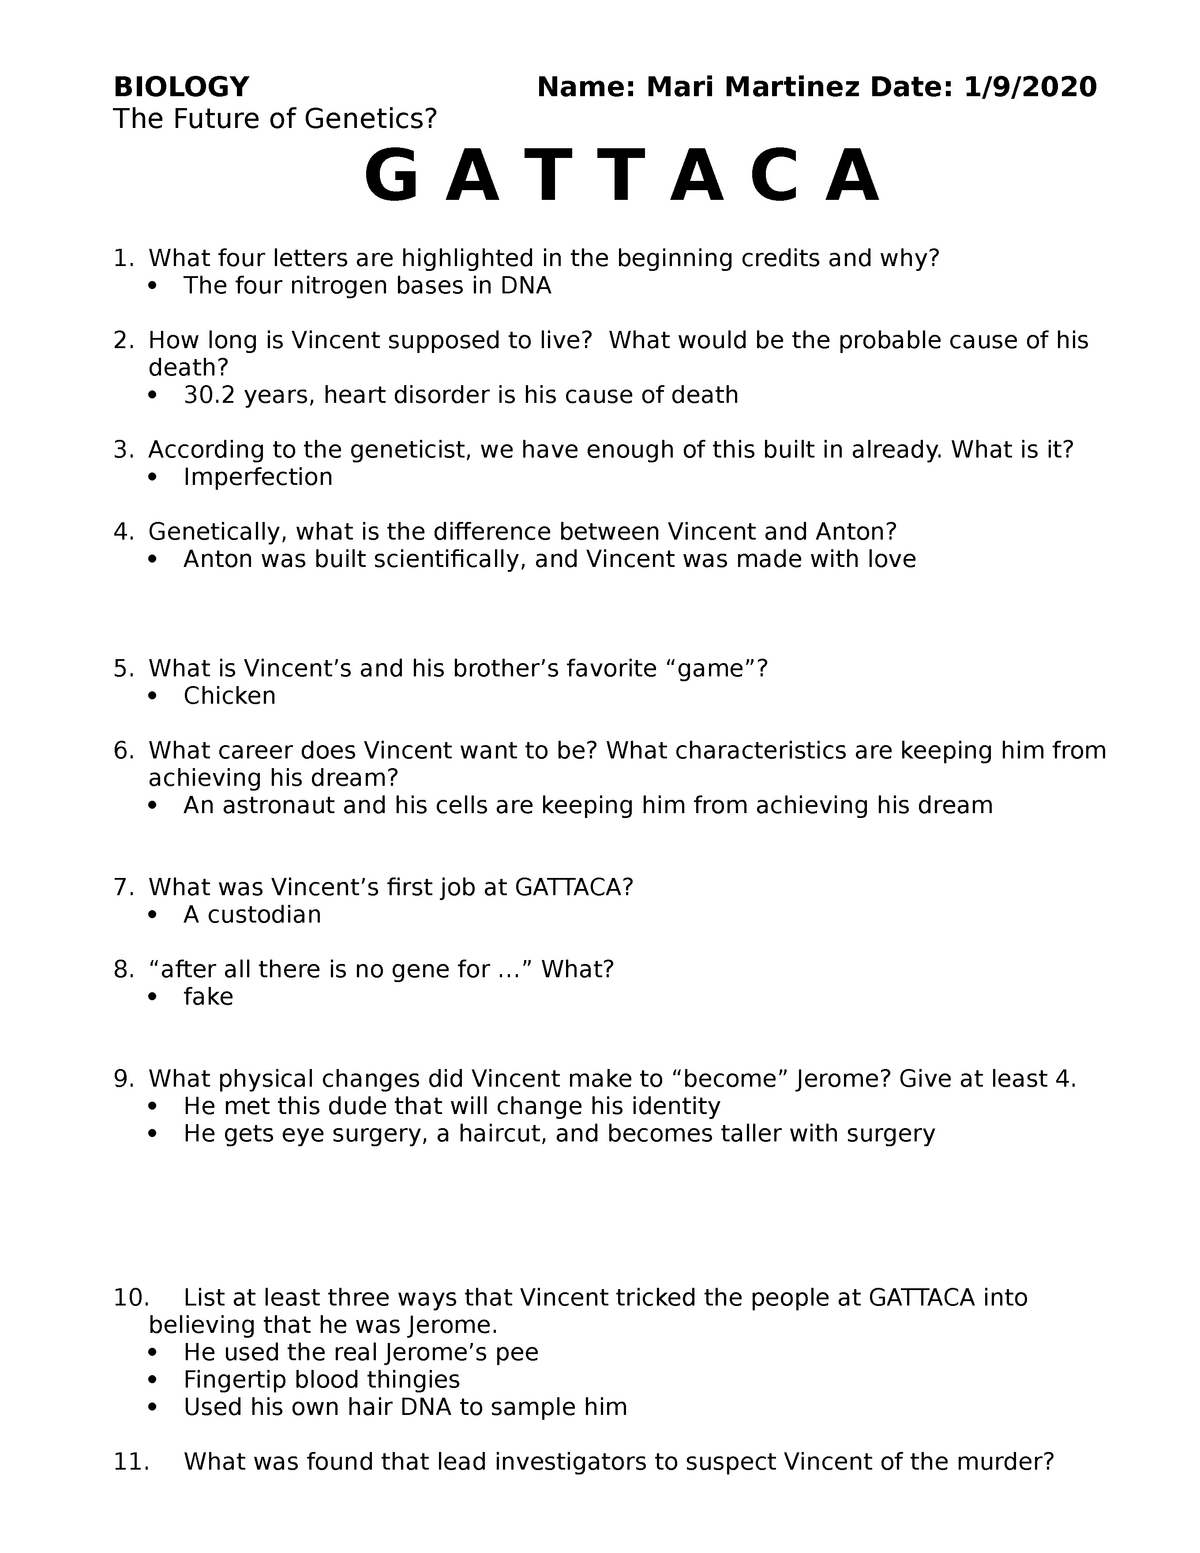 gattaca movie discussion questions answer key